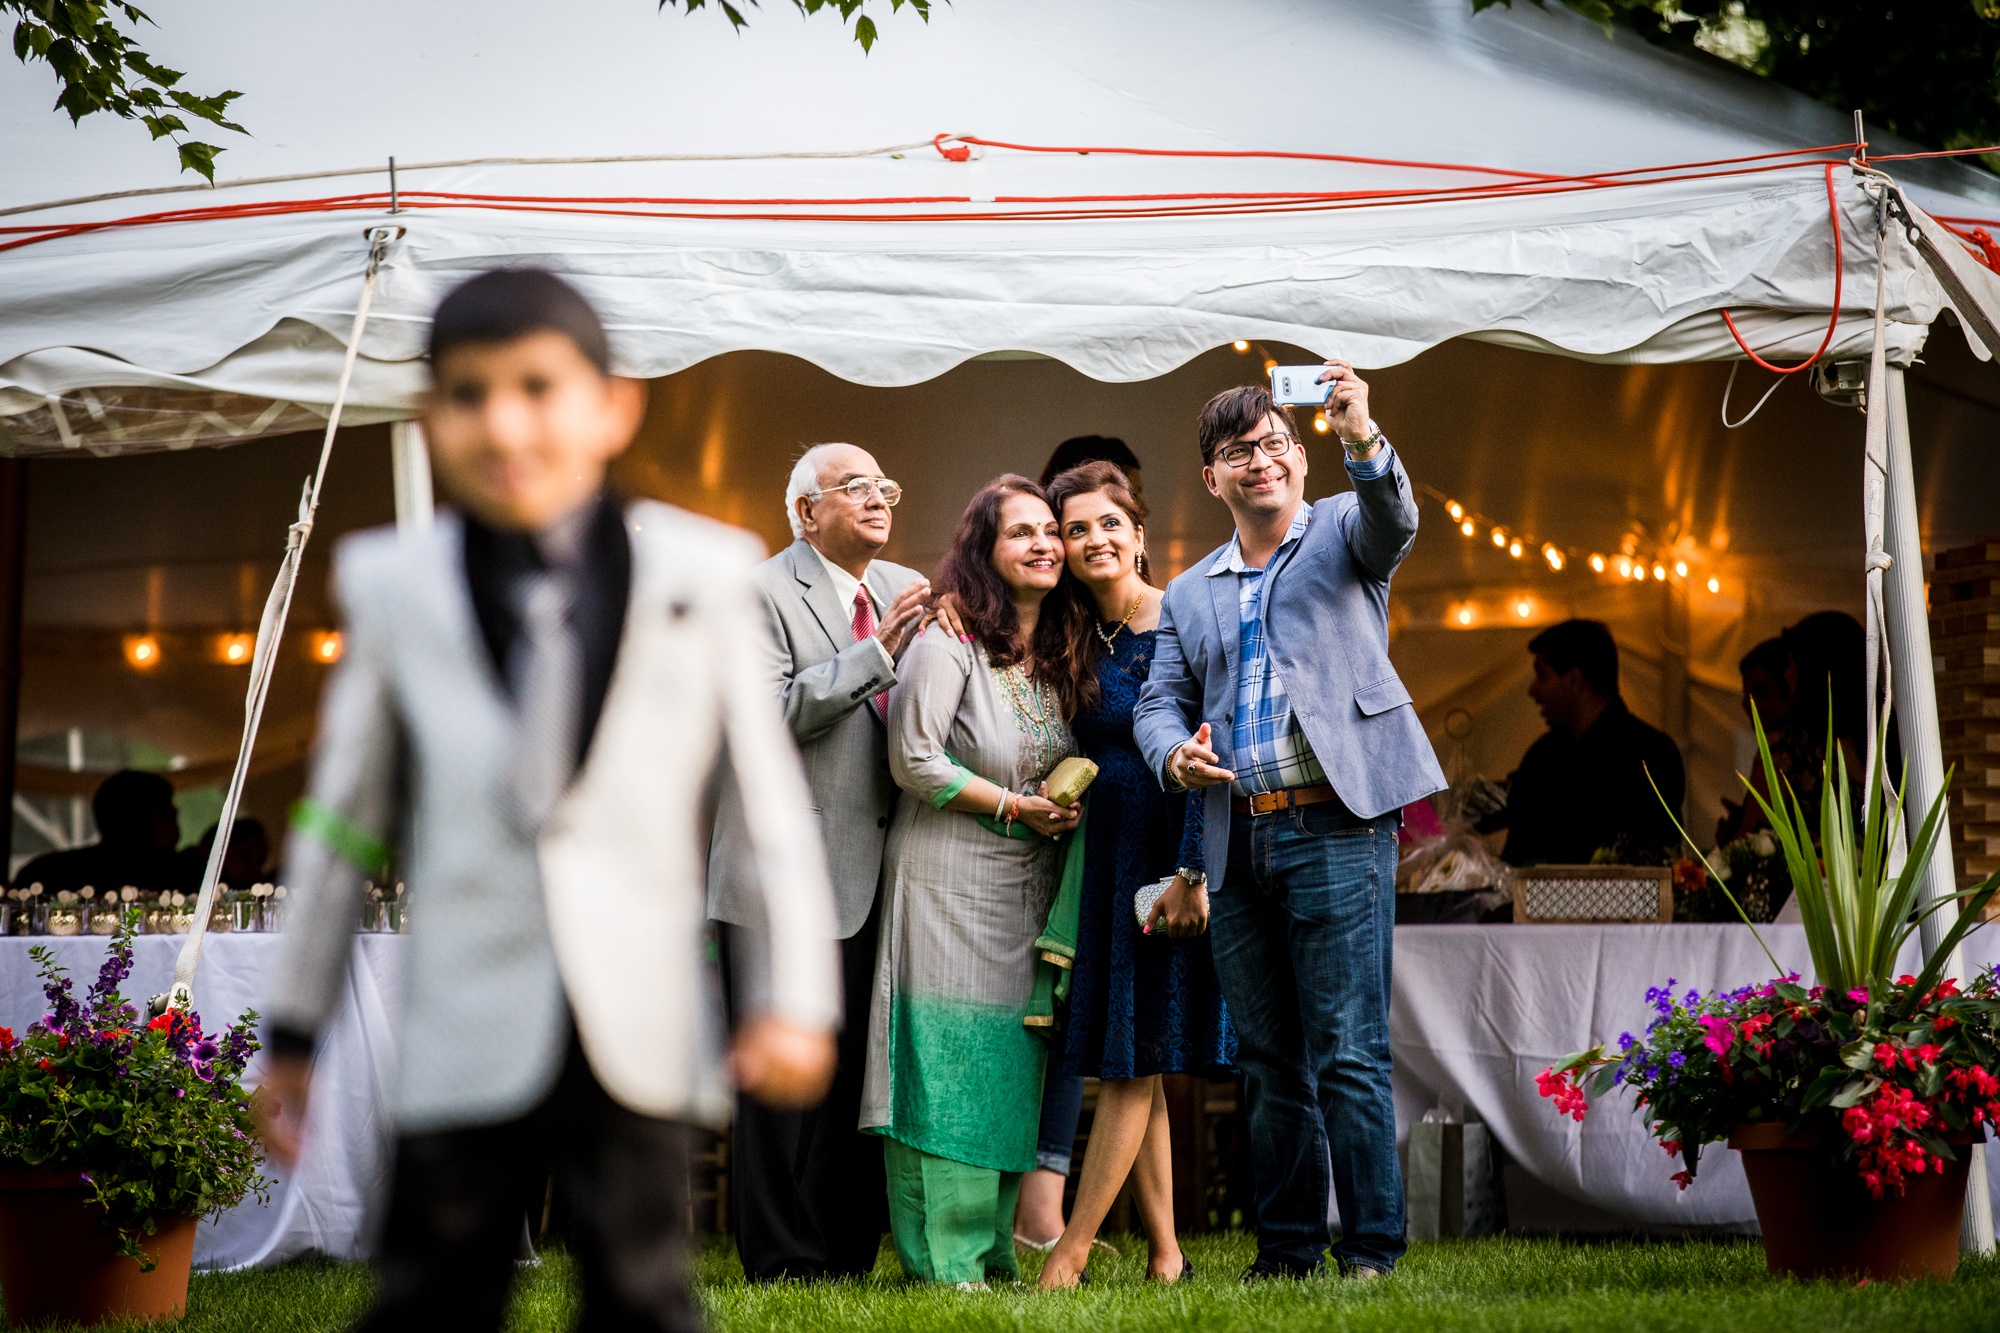 Guests take a photo together at a backyard wedding in Yorkville, Illinois